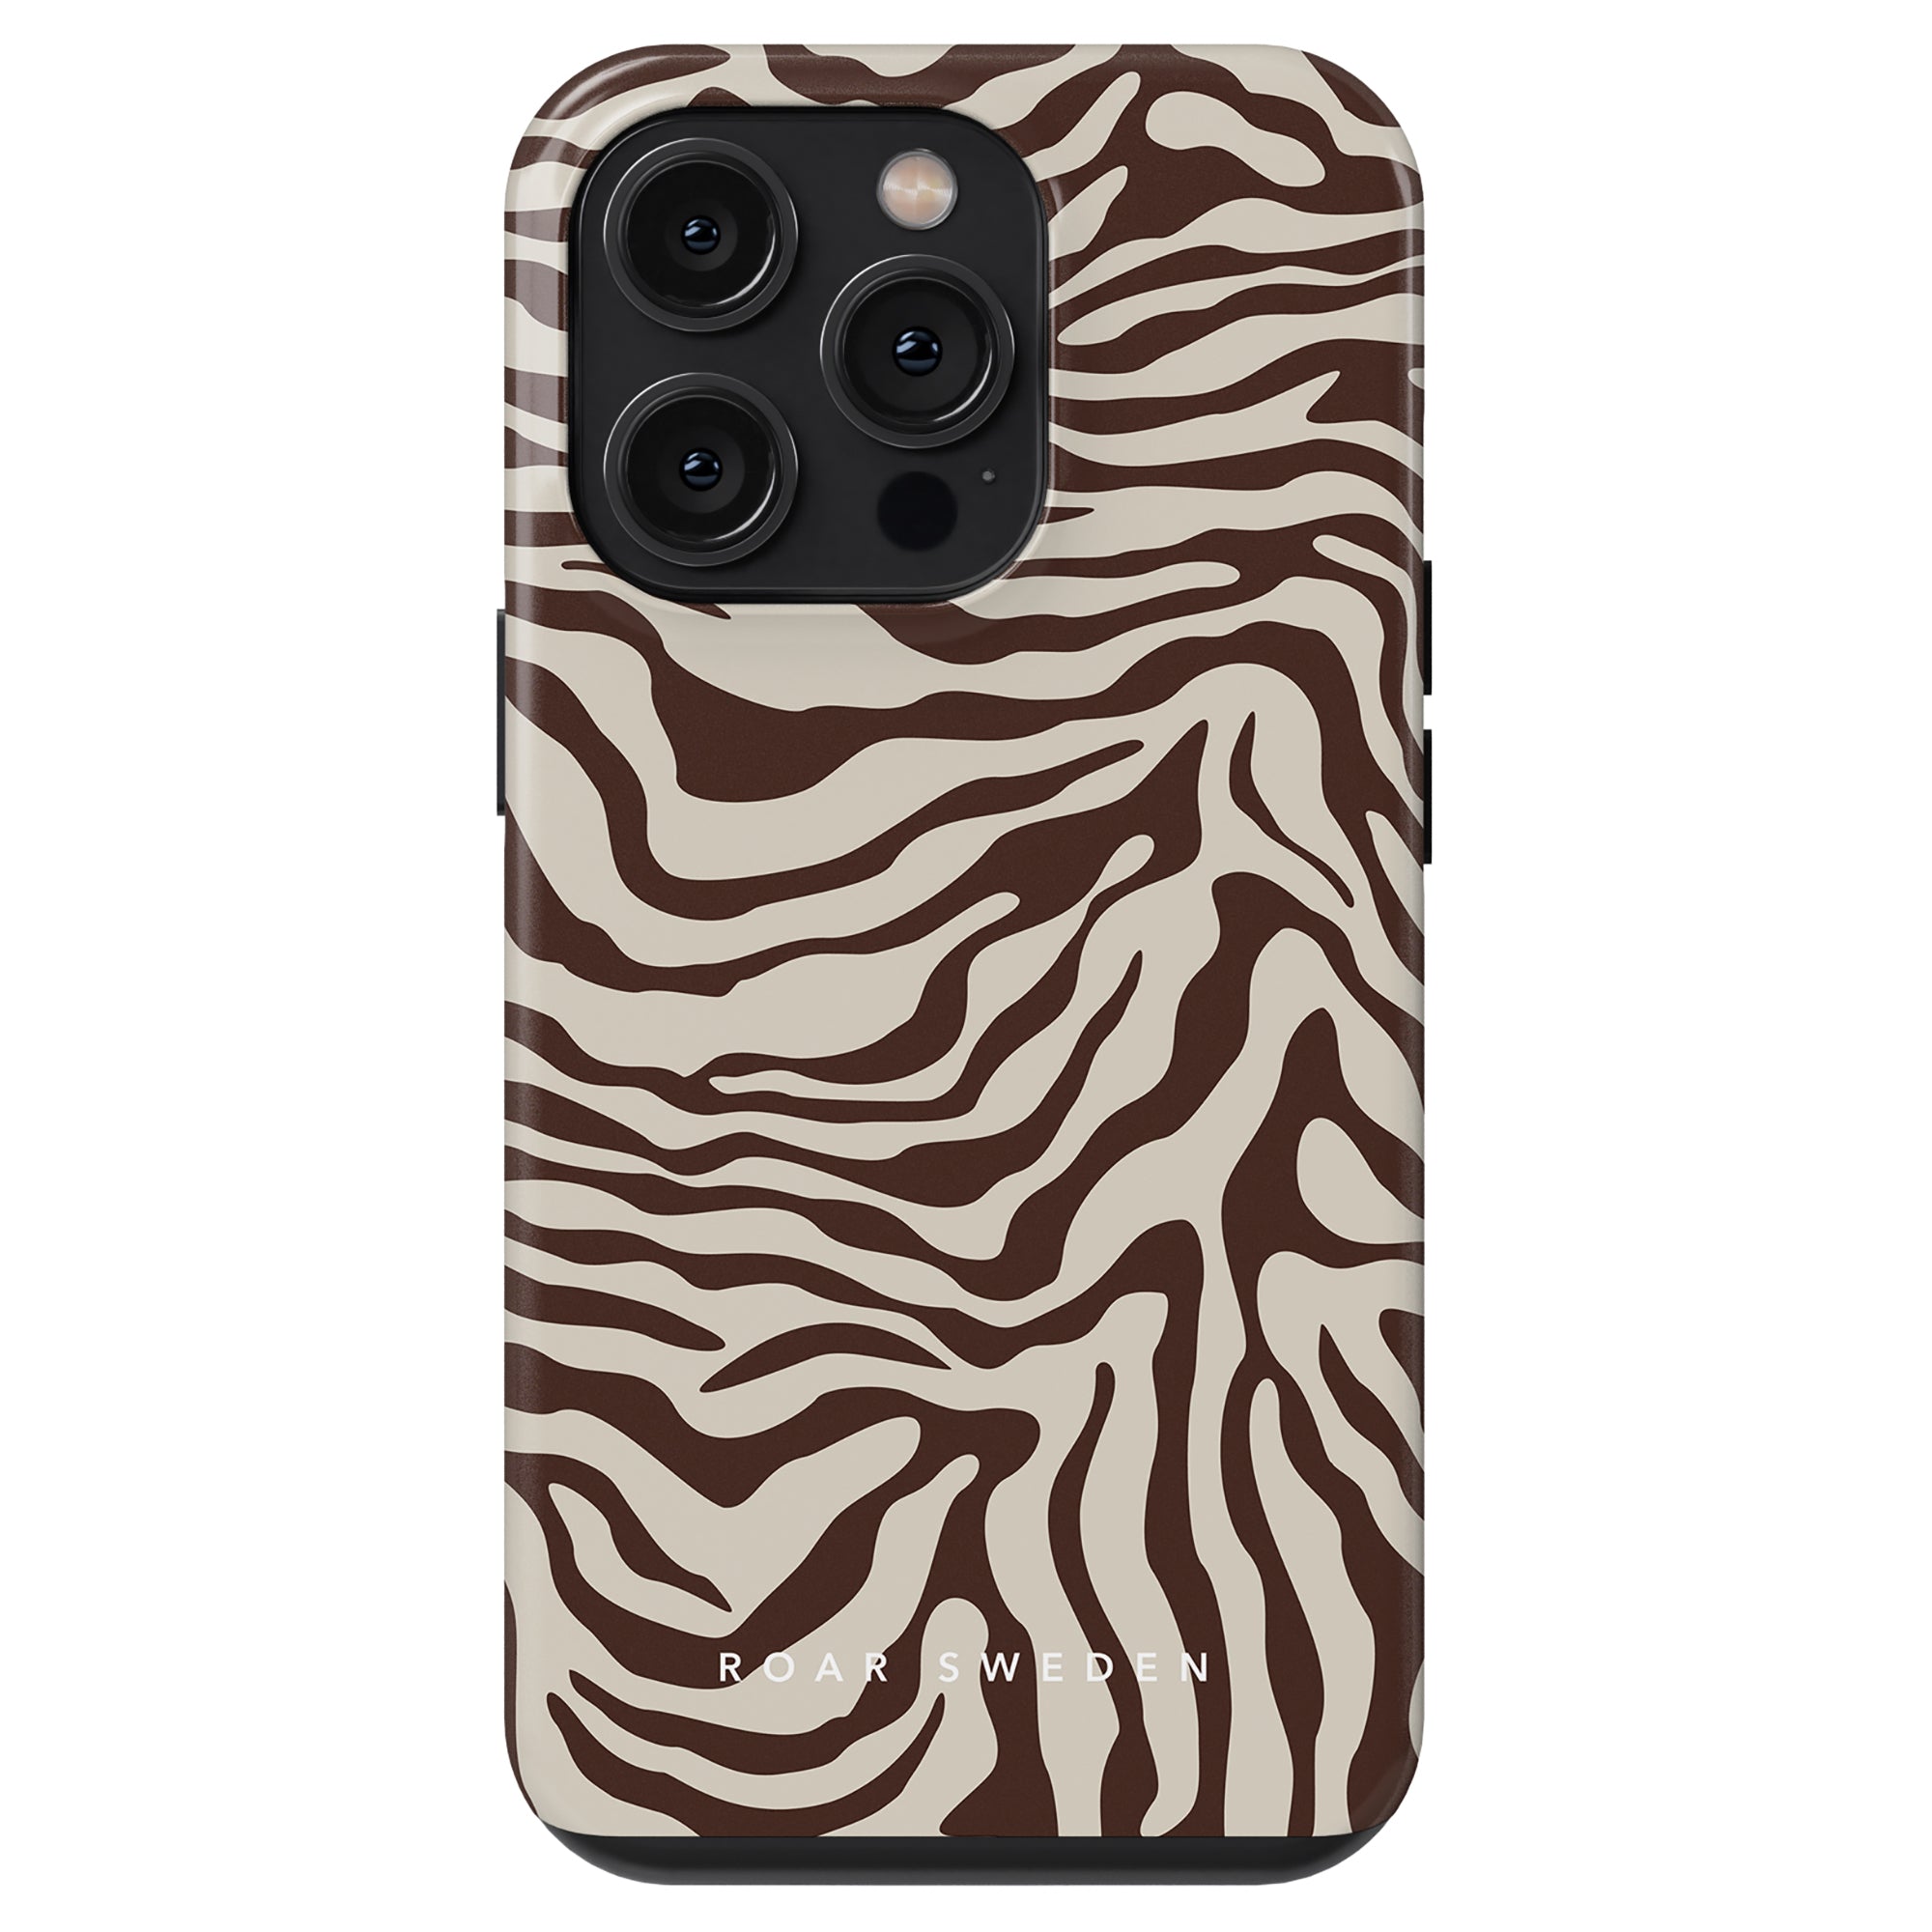 A Mocha - Tough Case featuring a brown and beige zebra stripe design from the Zebra Kollektion with a triple camera cutout, and the logo "roar sweden" at the bottom.